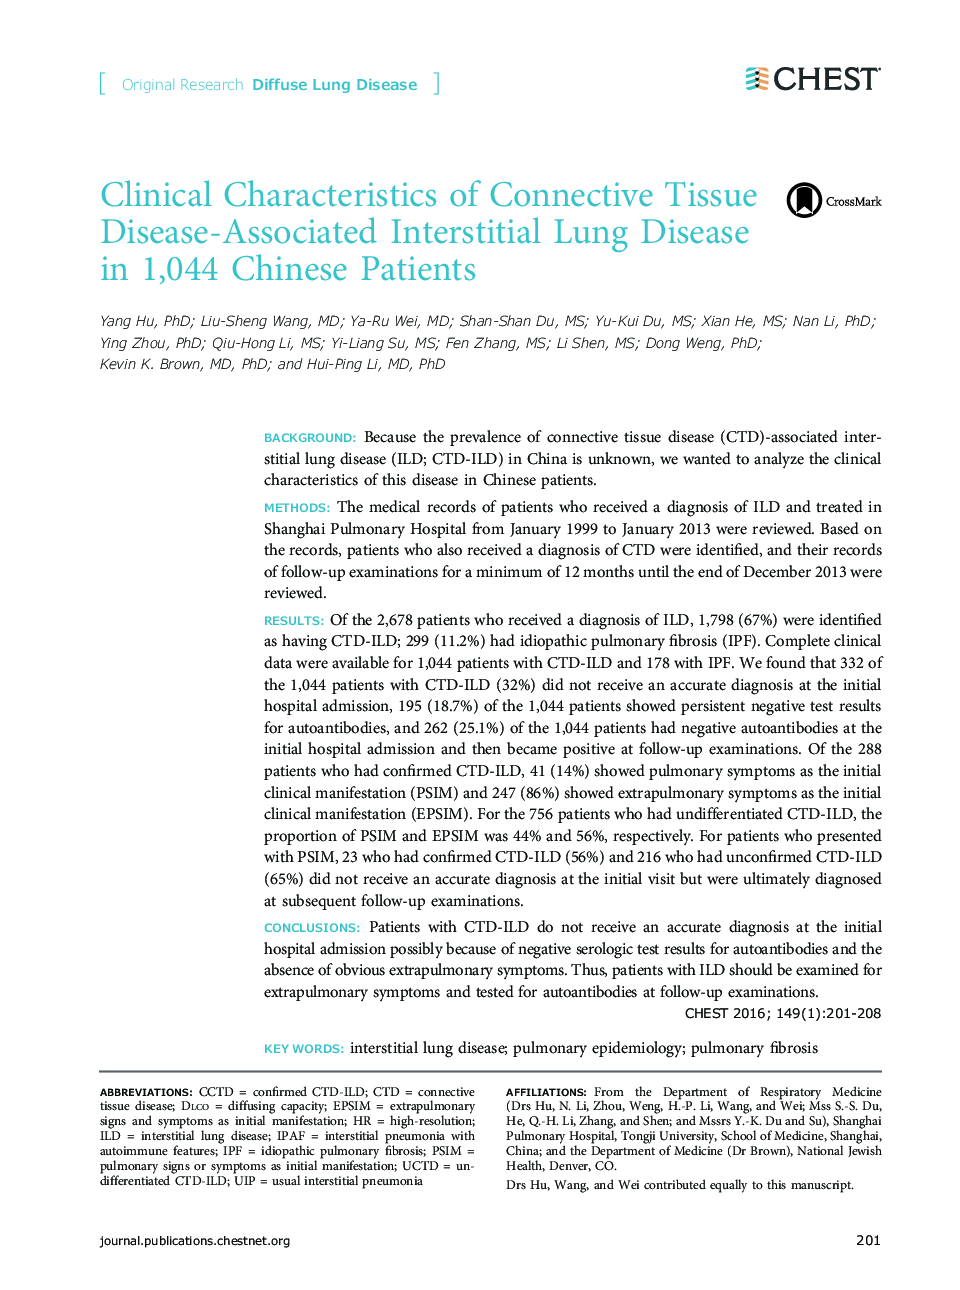 Clinical Characteristics of Connective Tissue Disease-Associated Interstitial Lung Disease in 1,044 Chinese Patients